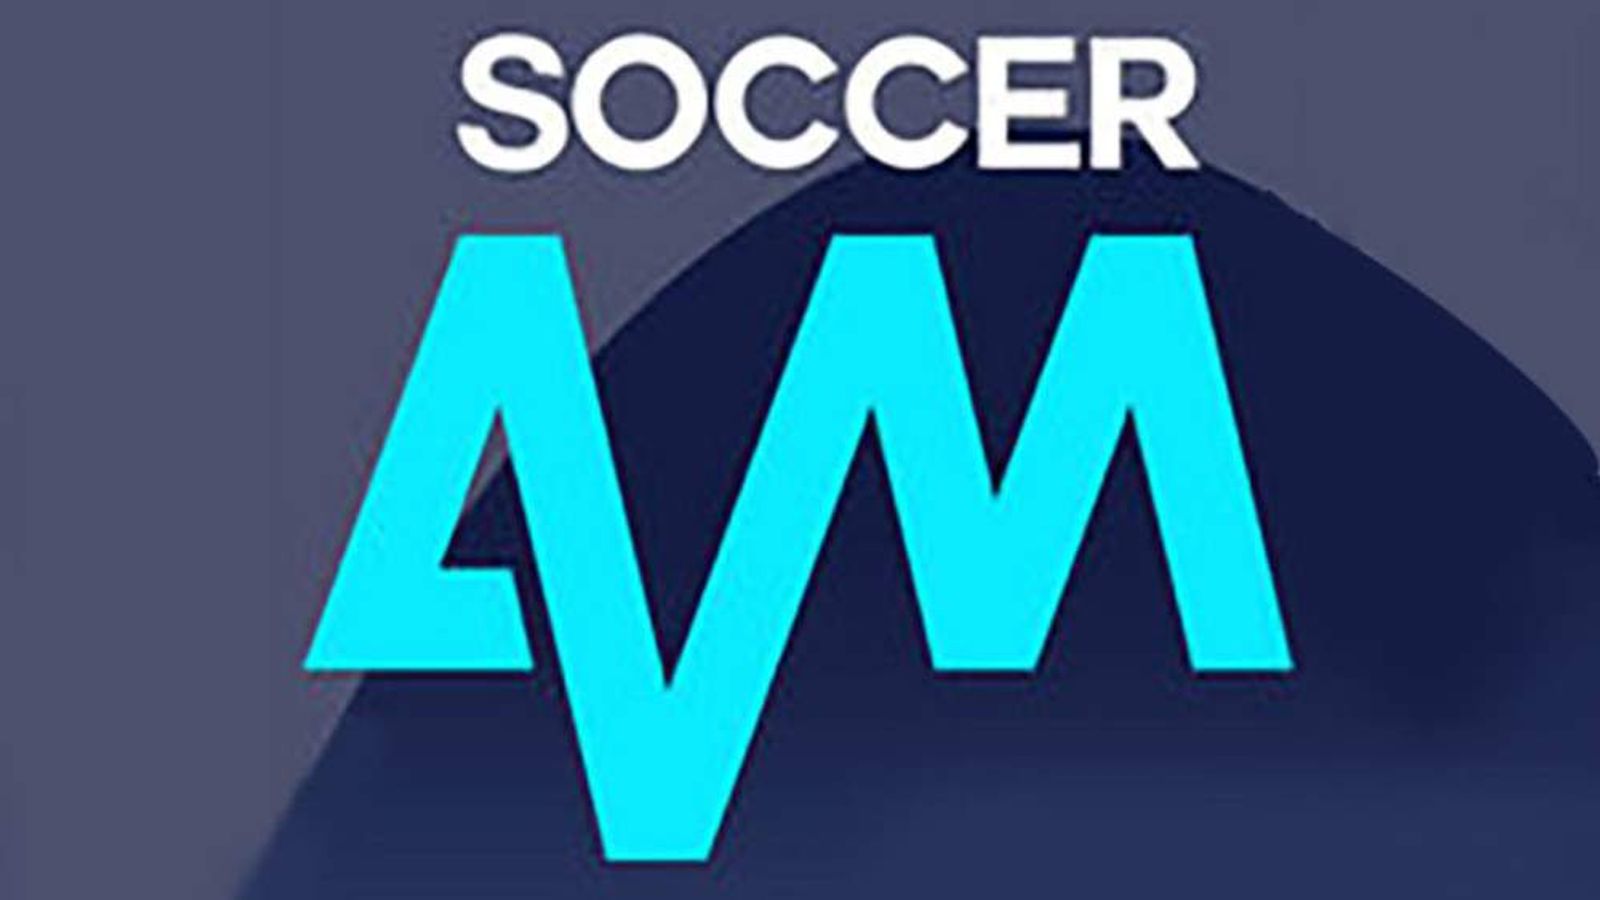 New Social Media Football Channel Is Launched | Scoop News | Sky News